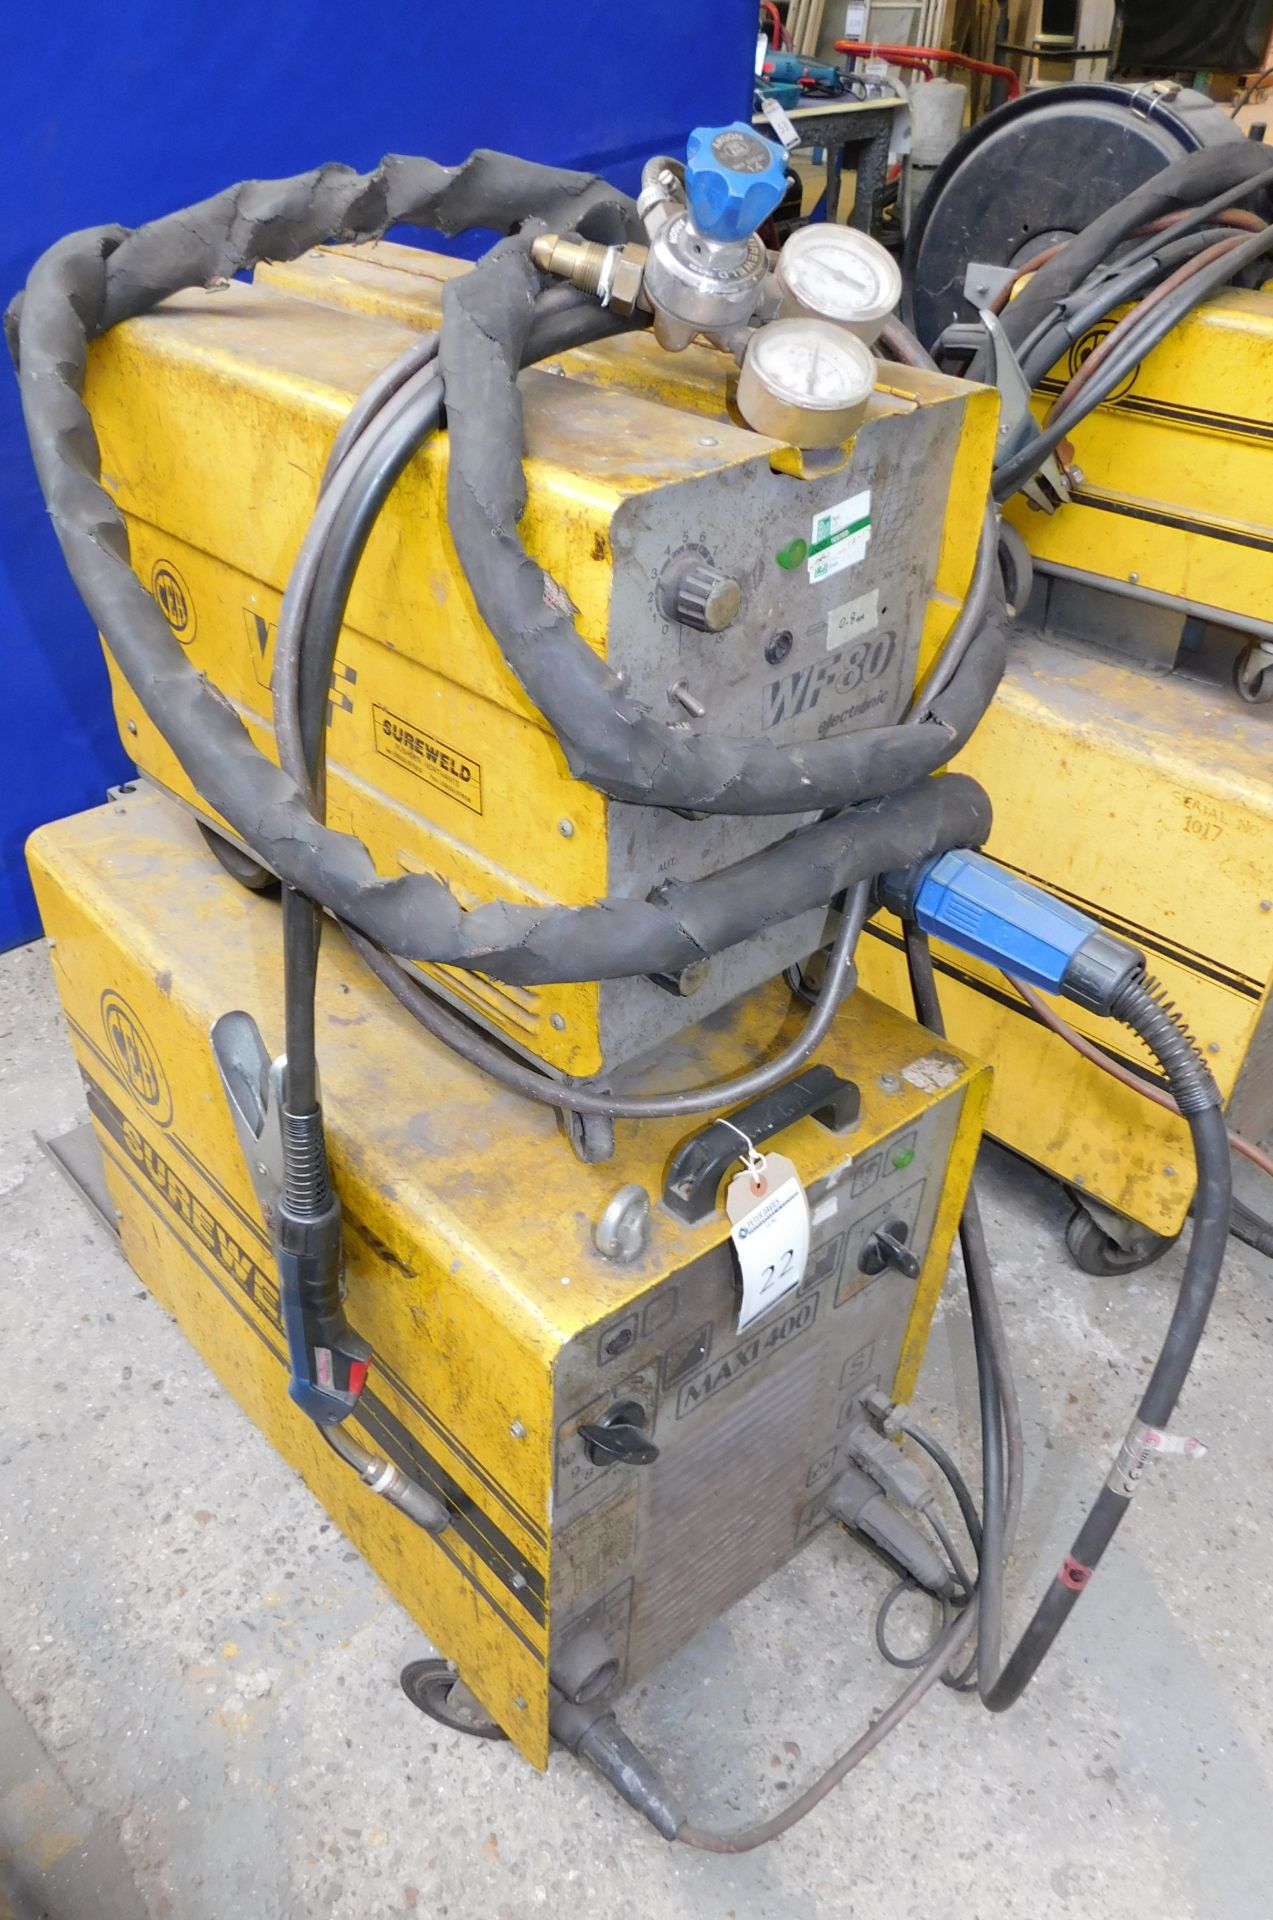 CEA Sureweld MXI 400 MIG Welder with WF80 Electronic Wire Feeder, Torch, Earth Lead & Gauge, s/n